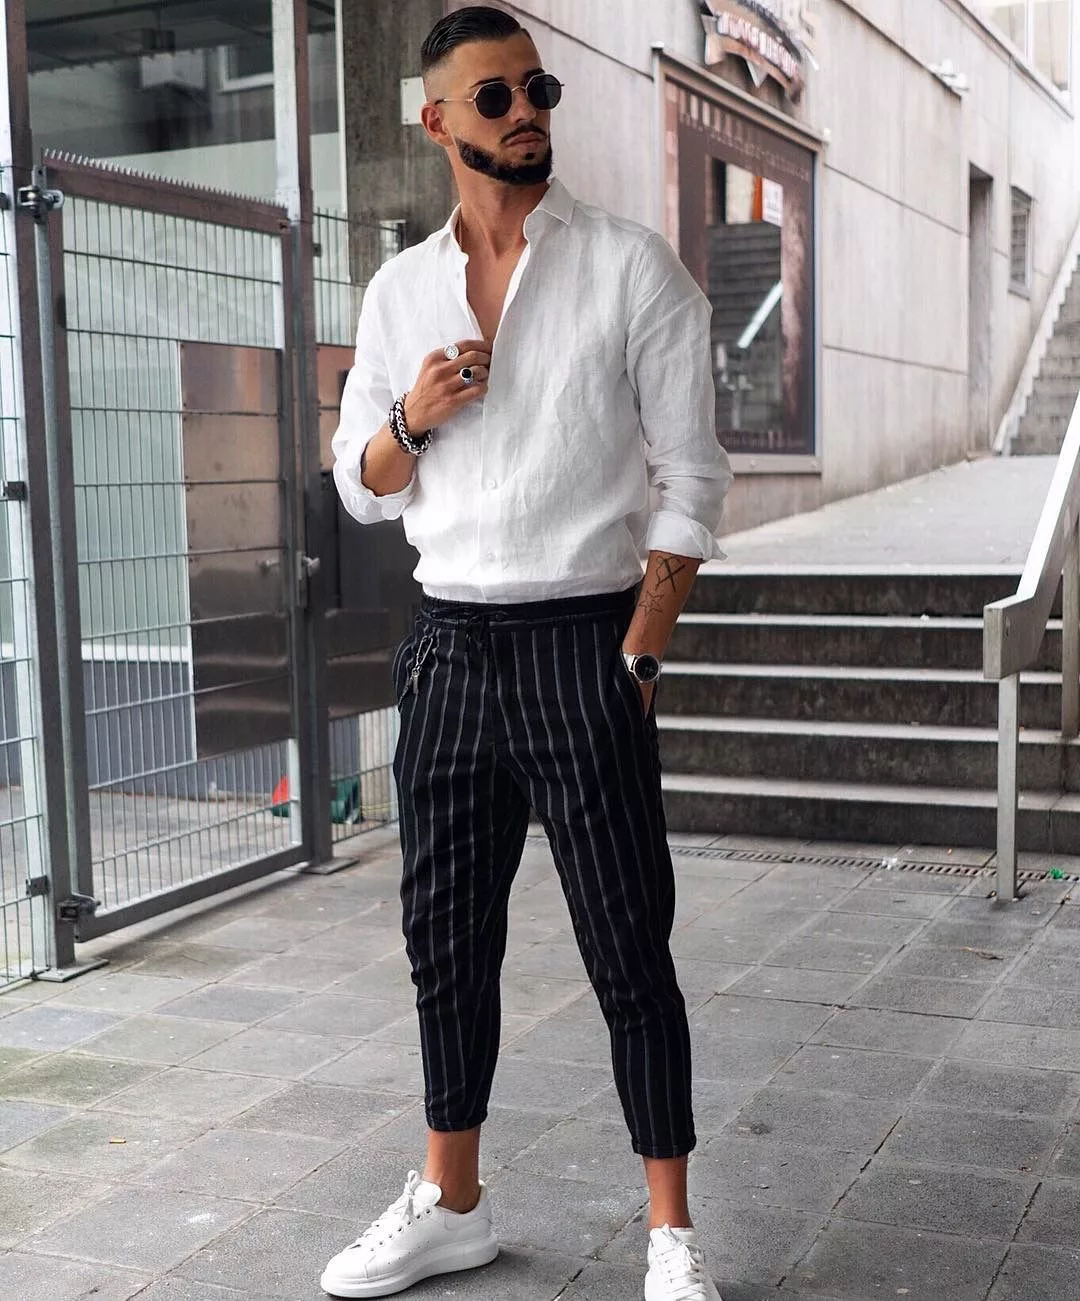 10 outfits that will teach you how to combine a white shirt for men